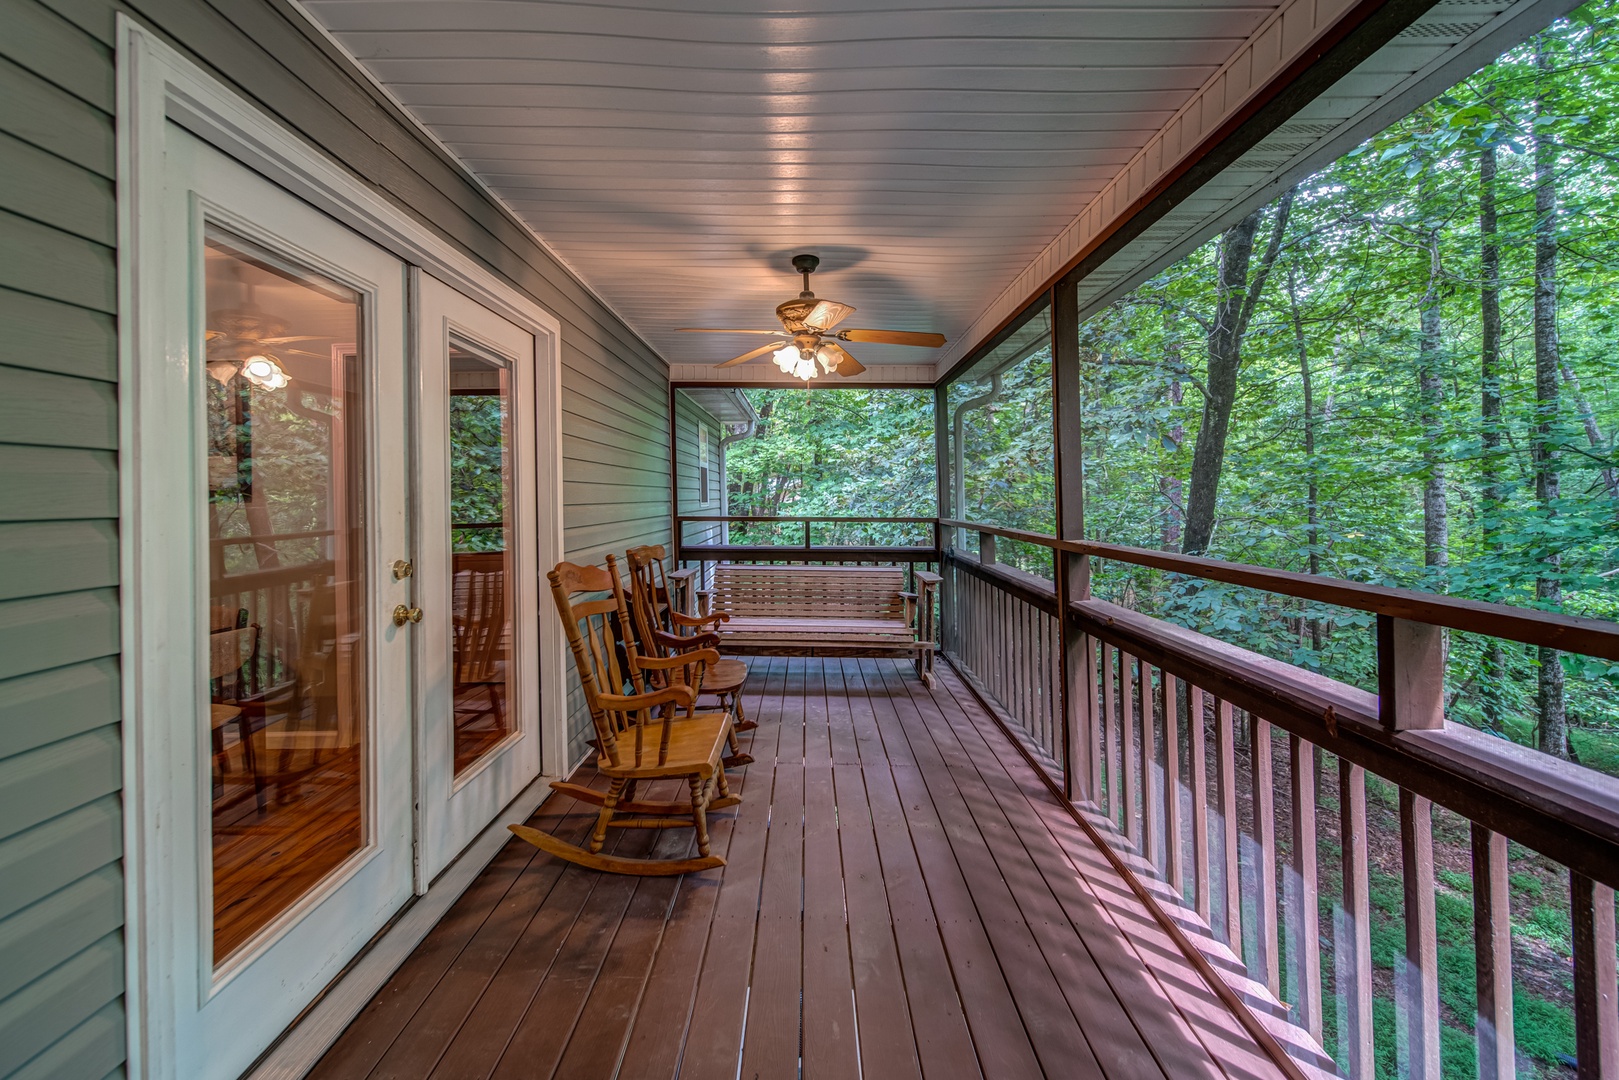 Enjoy treehouse views from the screened-in back deck